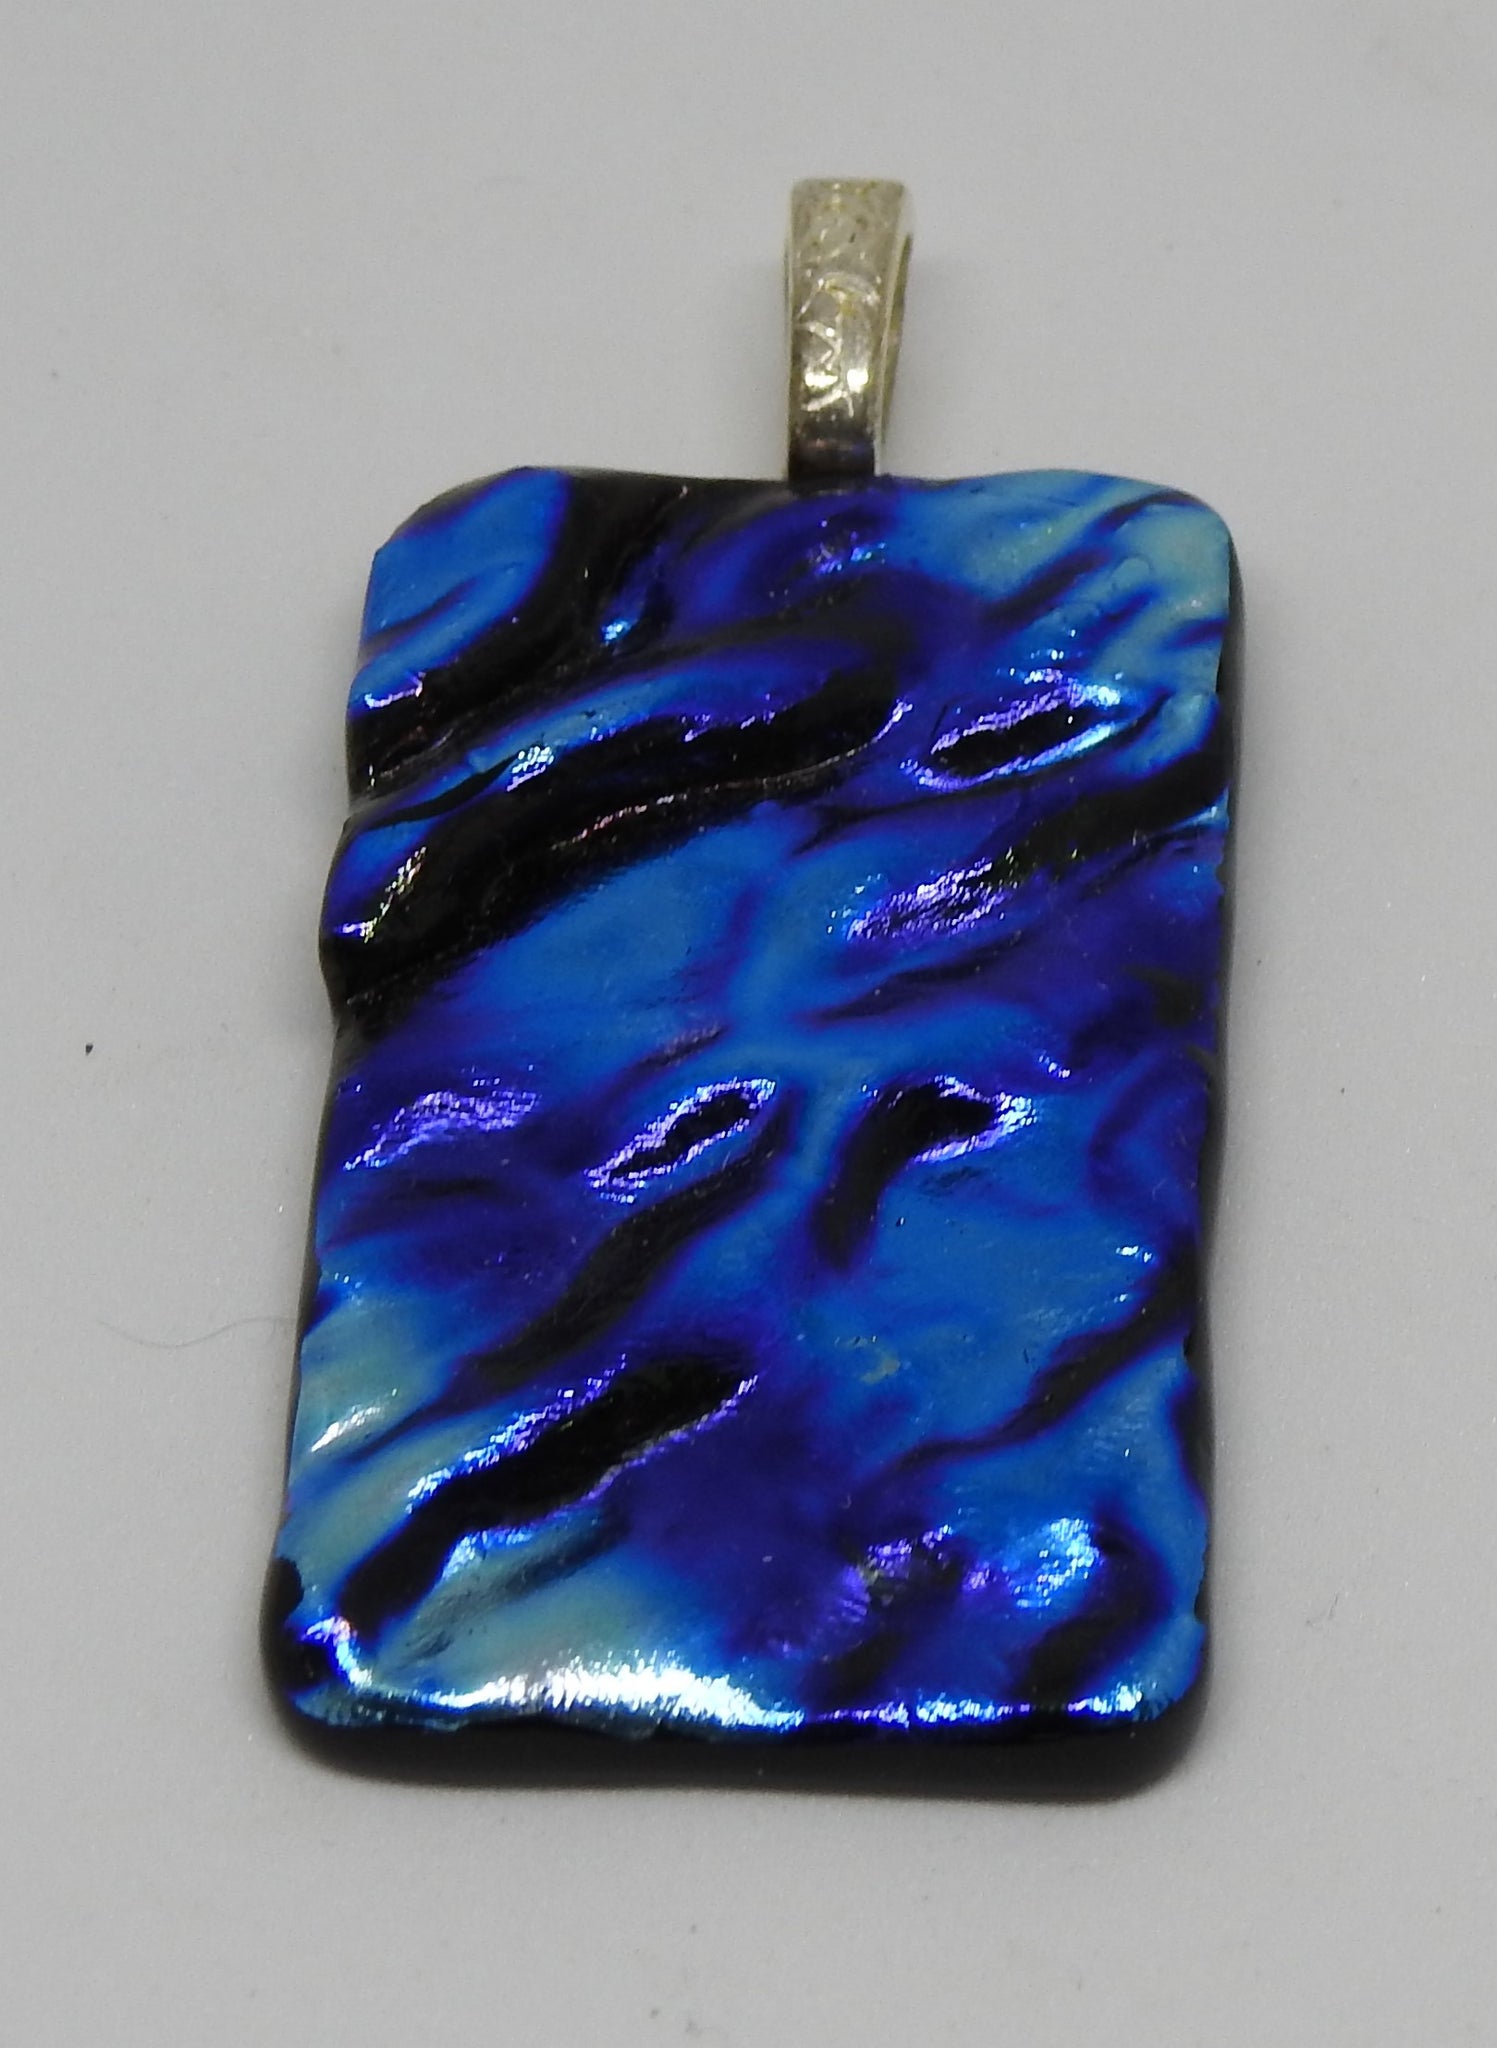 Blue Purple and Silver Heavily Textured Dichroic Fused Glass Pendant